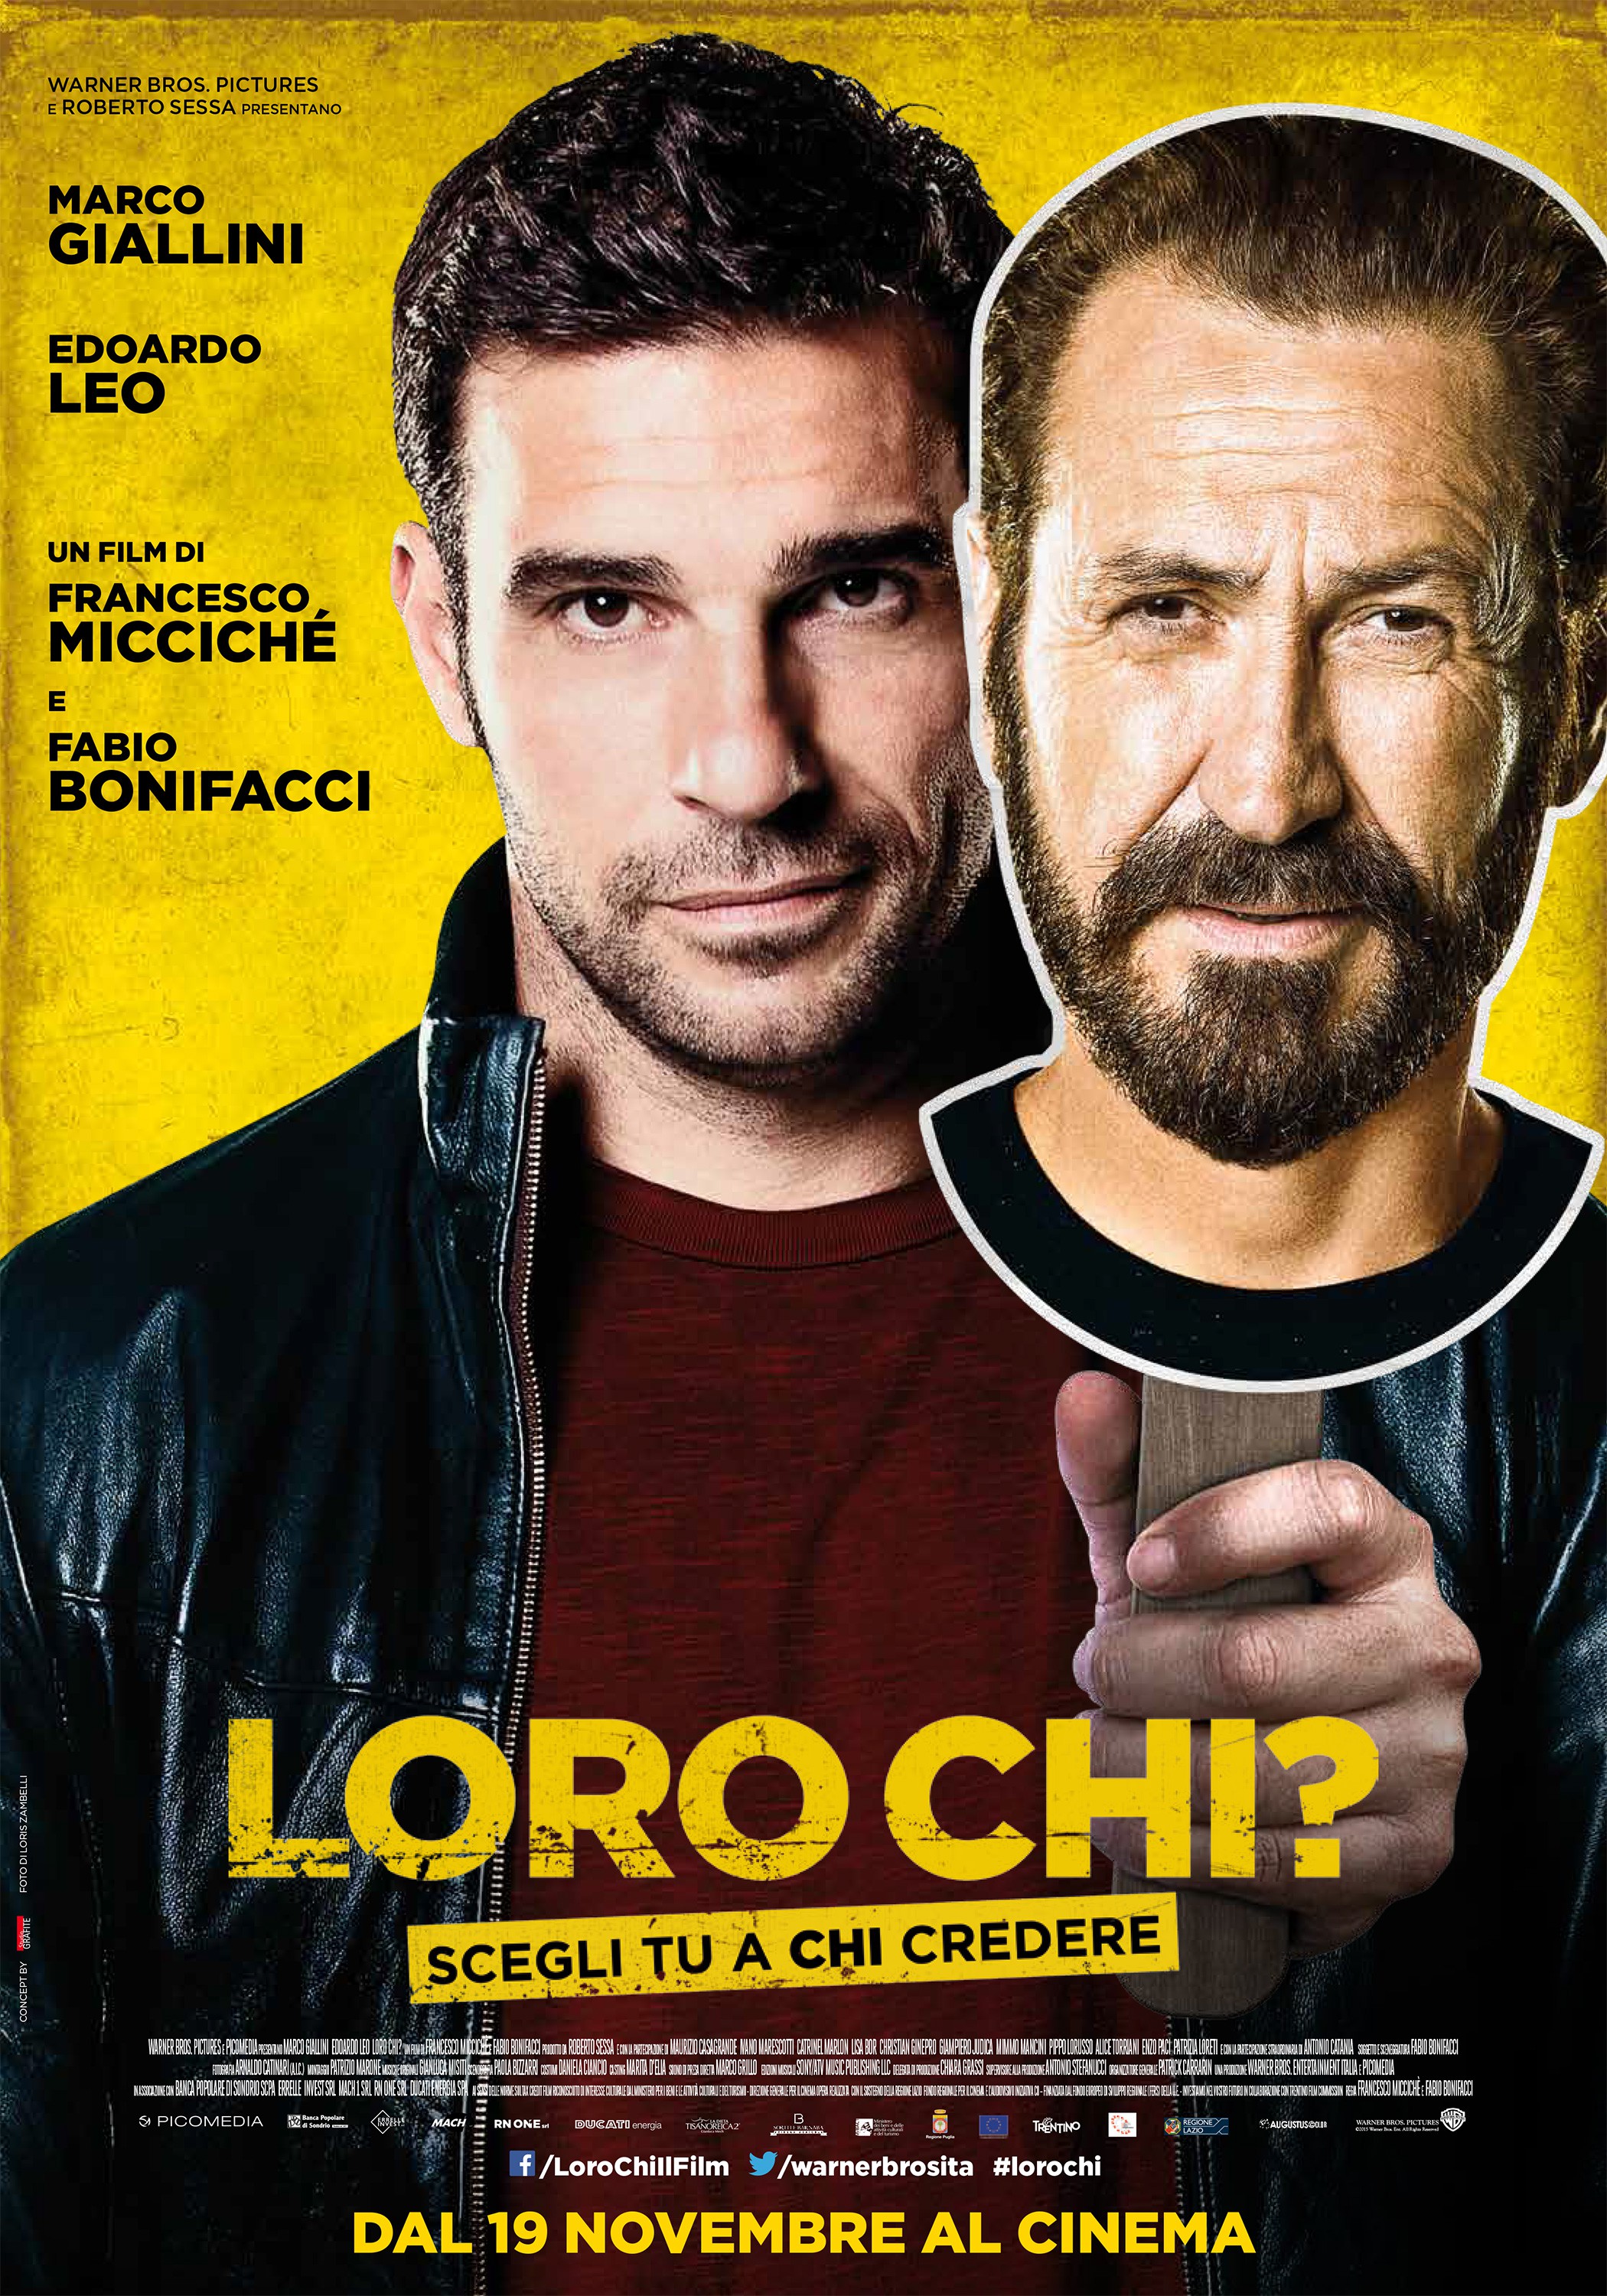 Mega Sized Movie Poster Image for Loro chi? (#1 of 2)